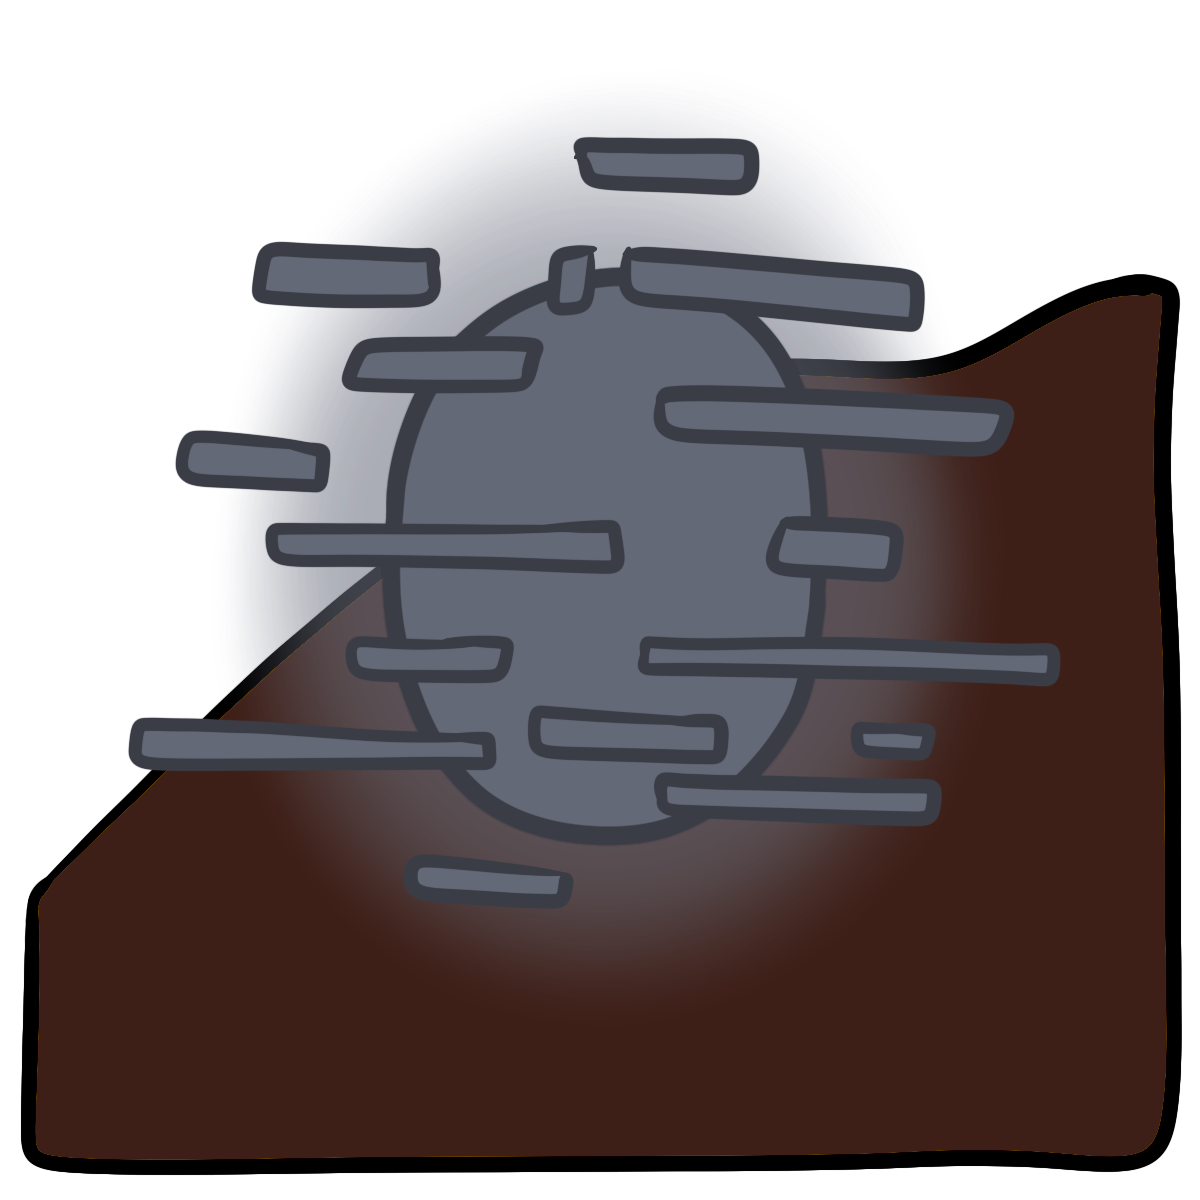 A dark gray glowing oval with horizontal thin rectangles around it. Curved dark brown skin fills the bottom half of the background.